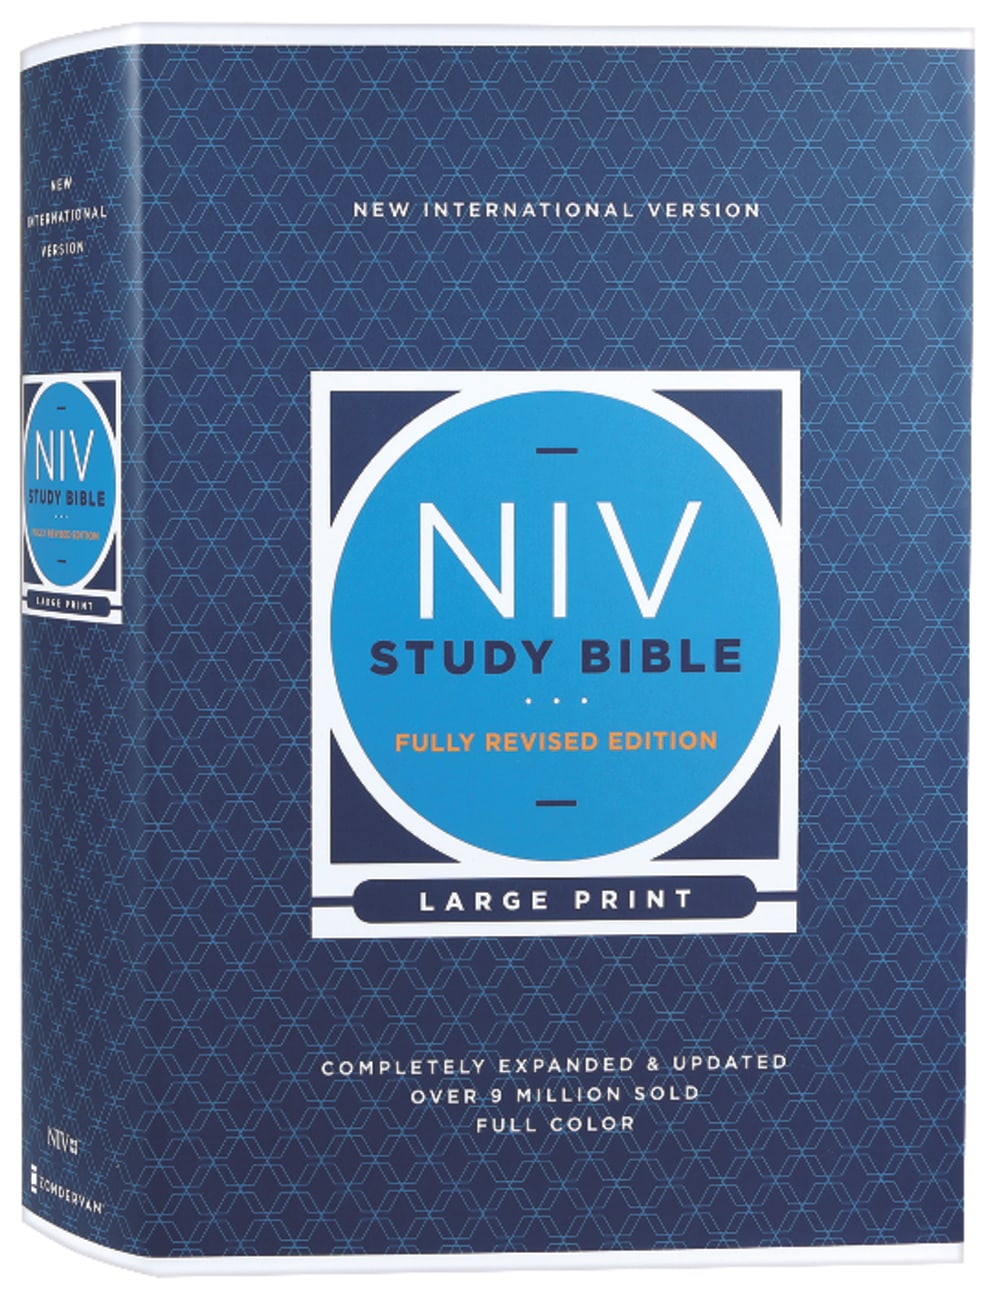 NIV Study Bible Large Print (Red Letter Edition) Fully Revised Edition (2020) Hardback